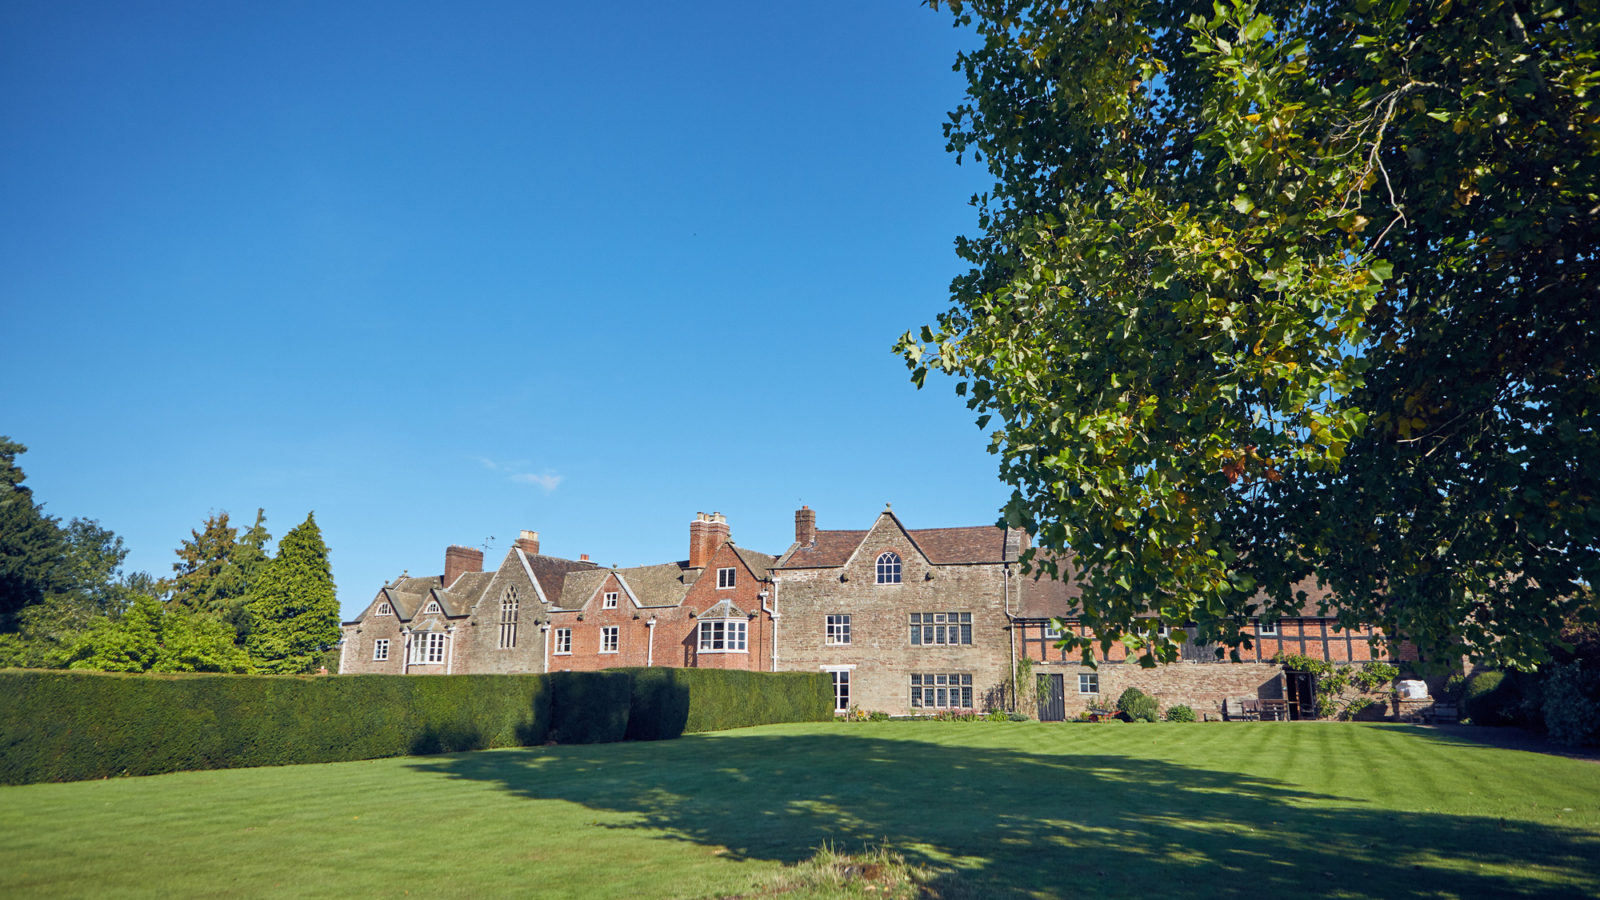  Broadstone Court - kate & tom's Large Holiday Homes